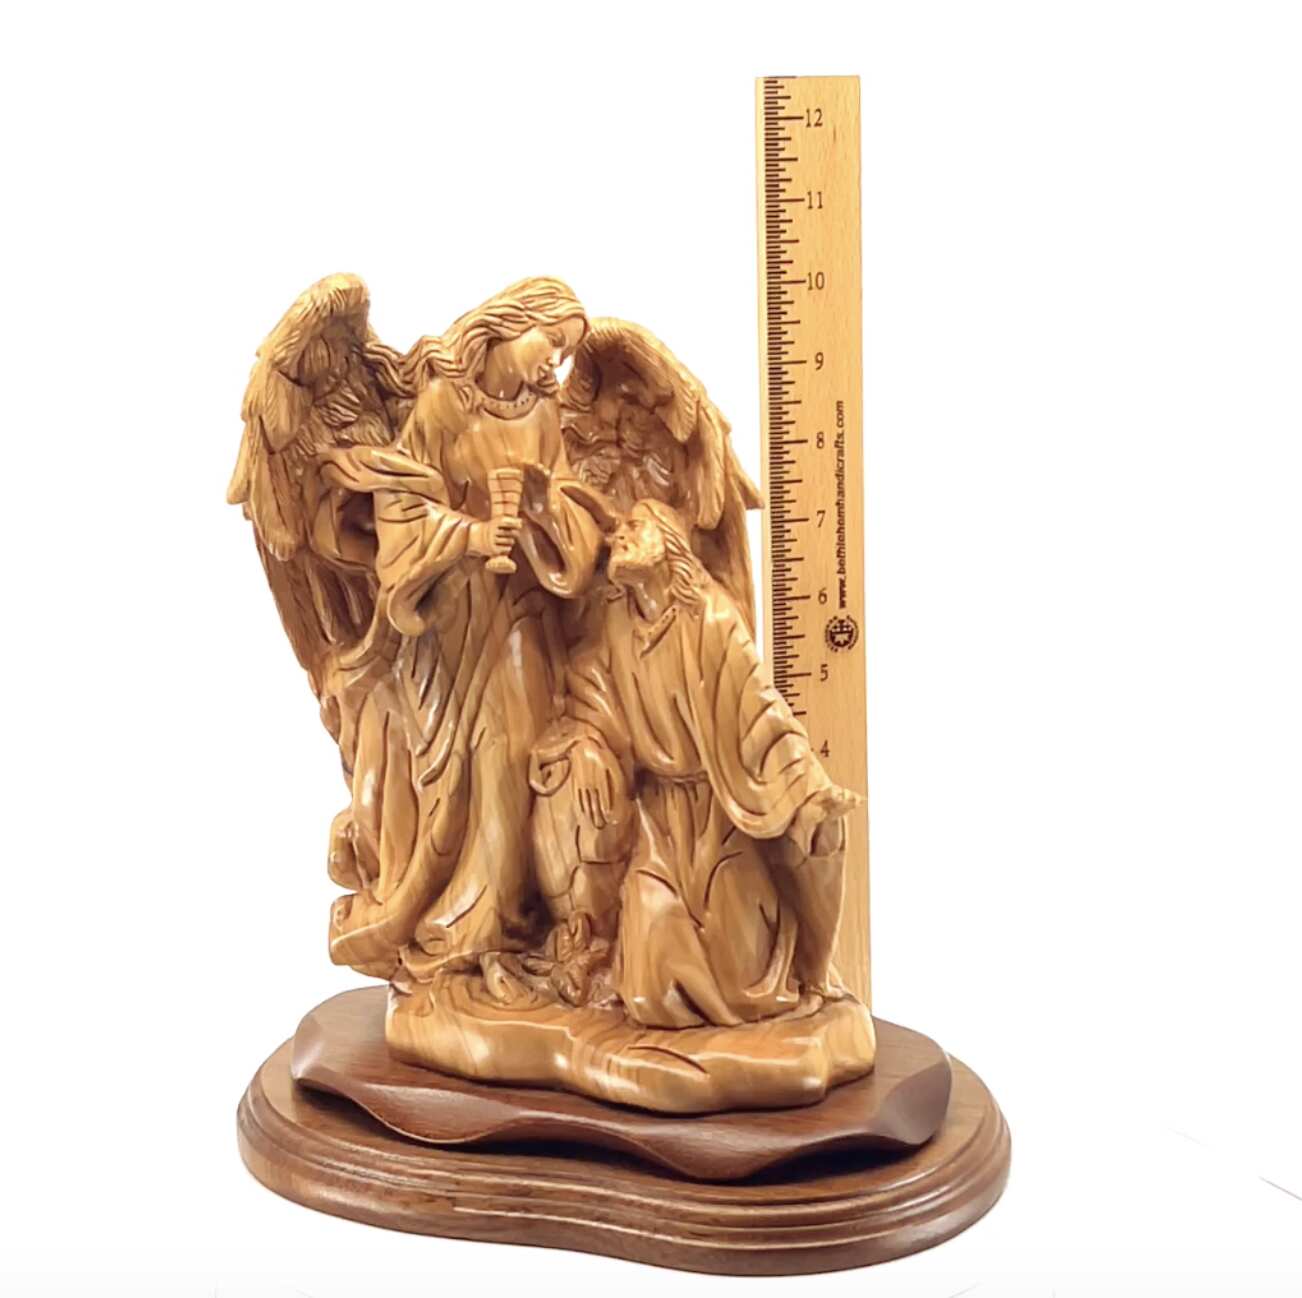 Jesus Christ with Angel in Garden of Gethsemane, 10.8" Masterpeice Carving from Holy Land Olive Wood